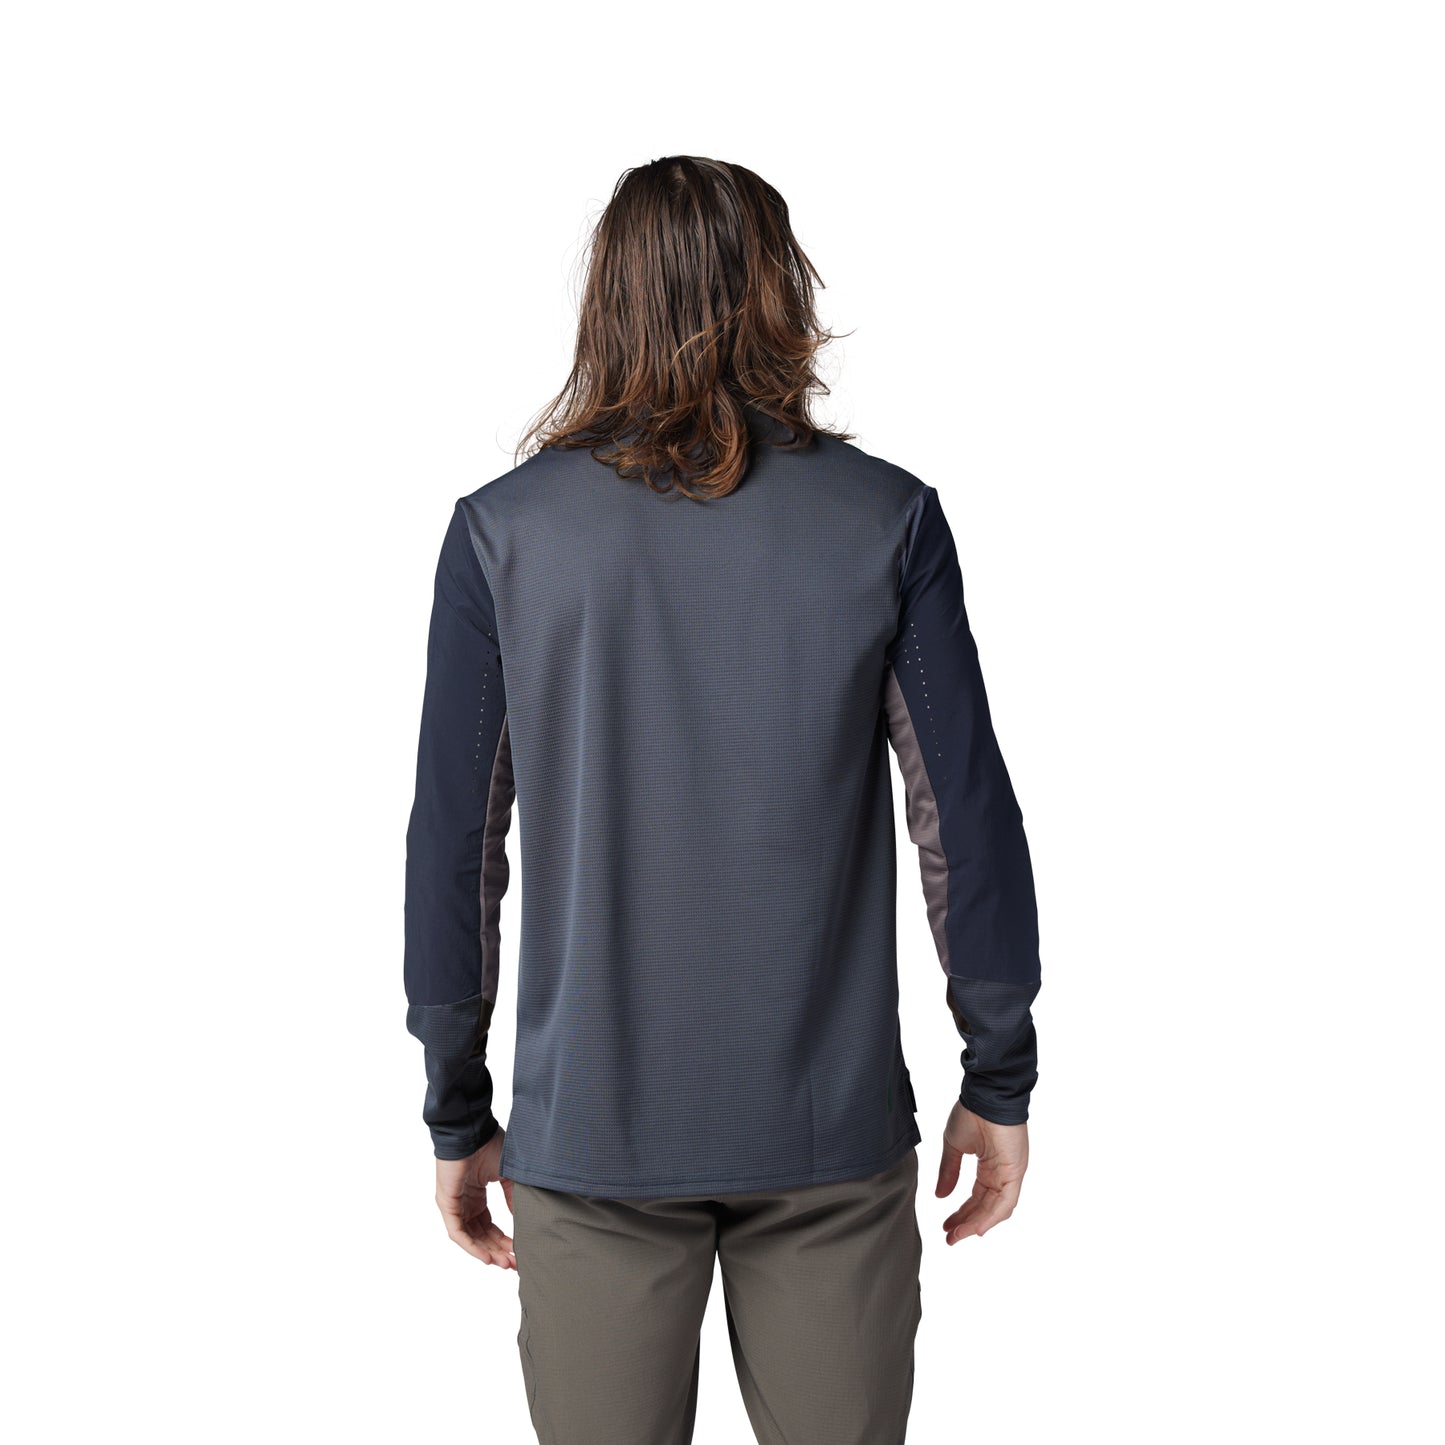 Fox Defend Long Sleeve Jersey - L - Graphite - Image 4